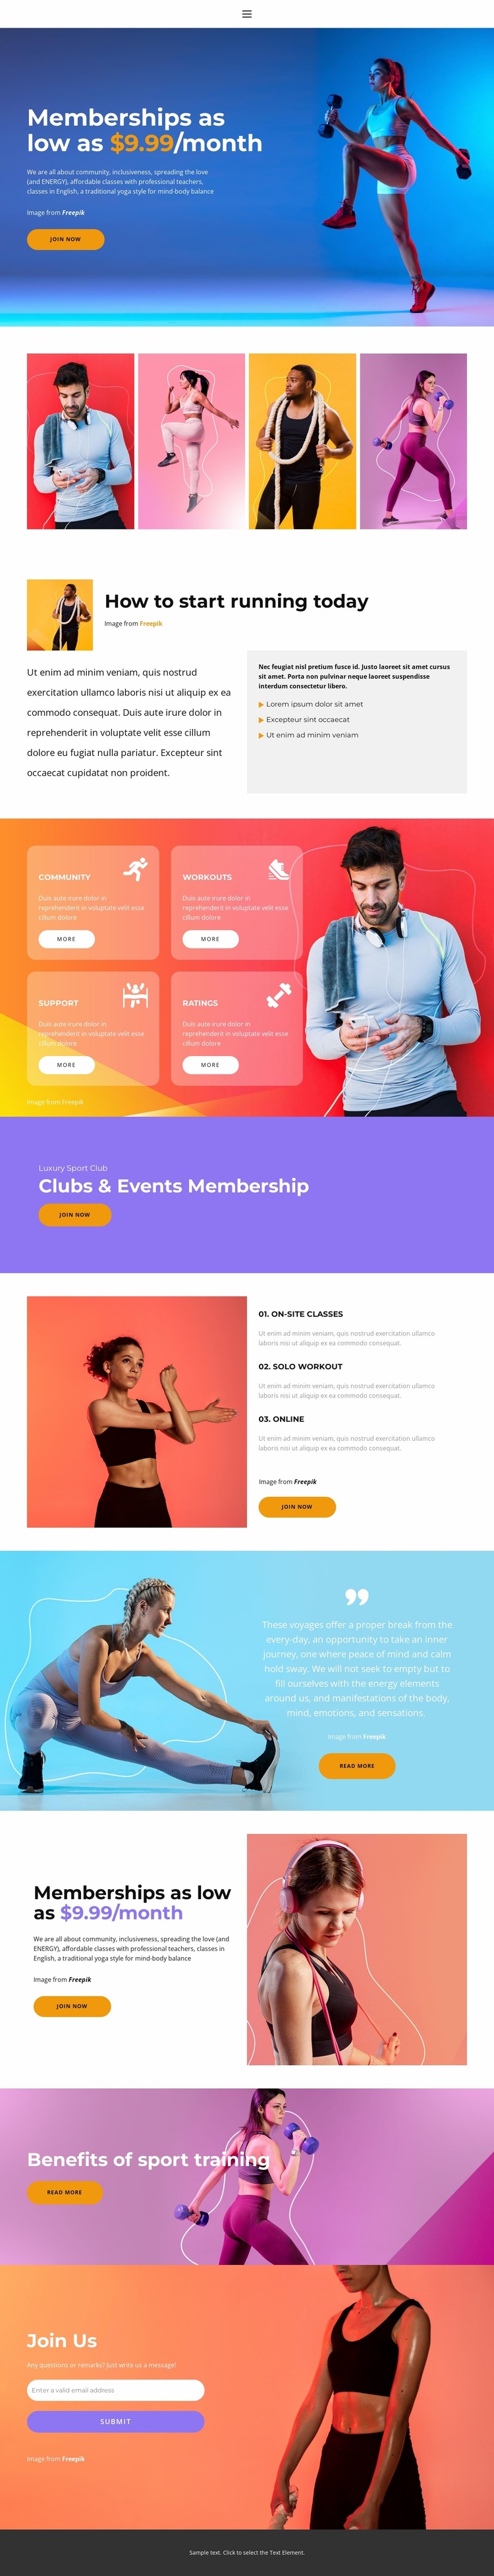 Sports every day Ecommerce Website Design